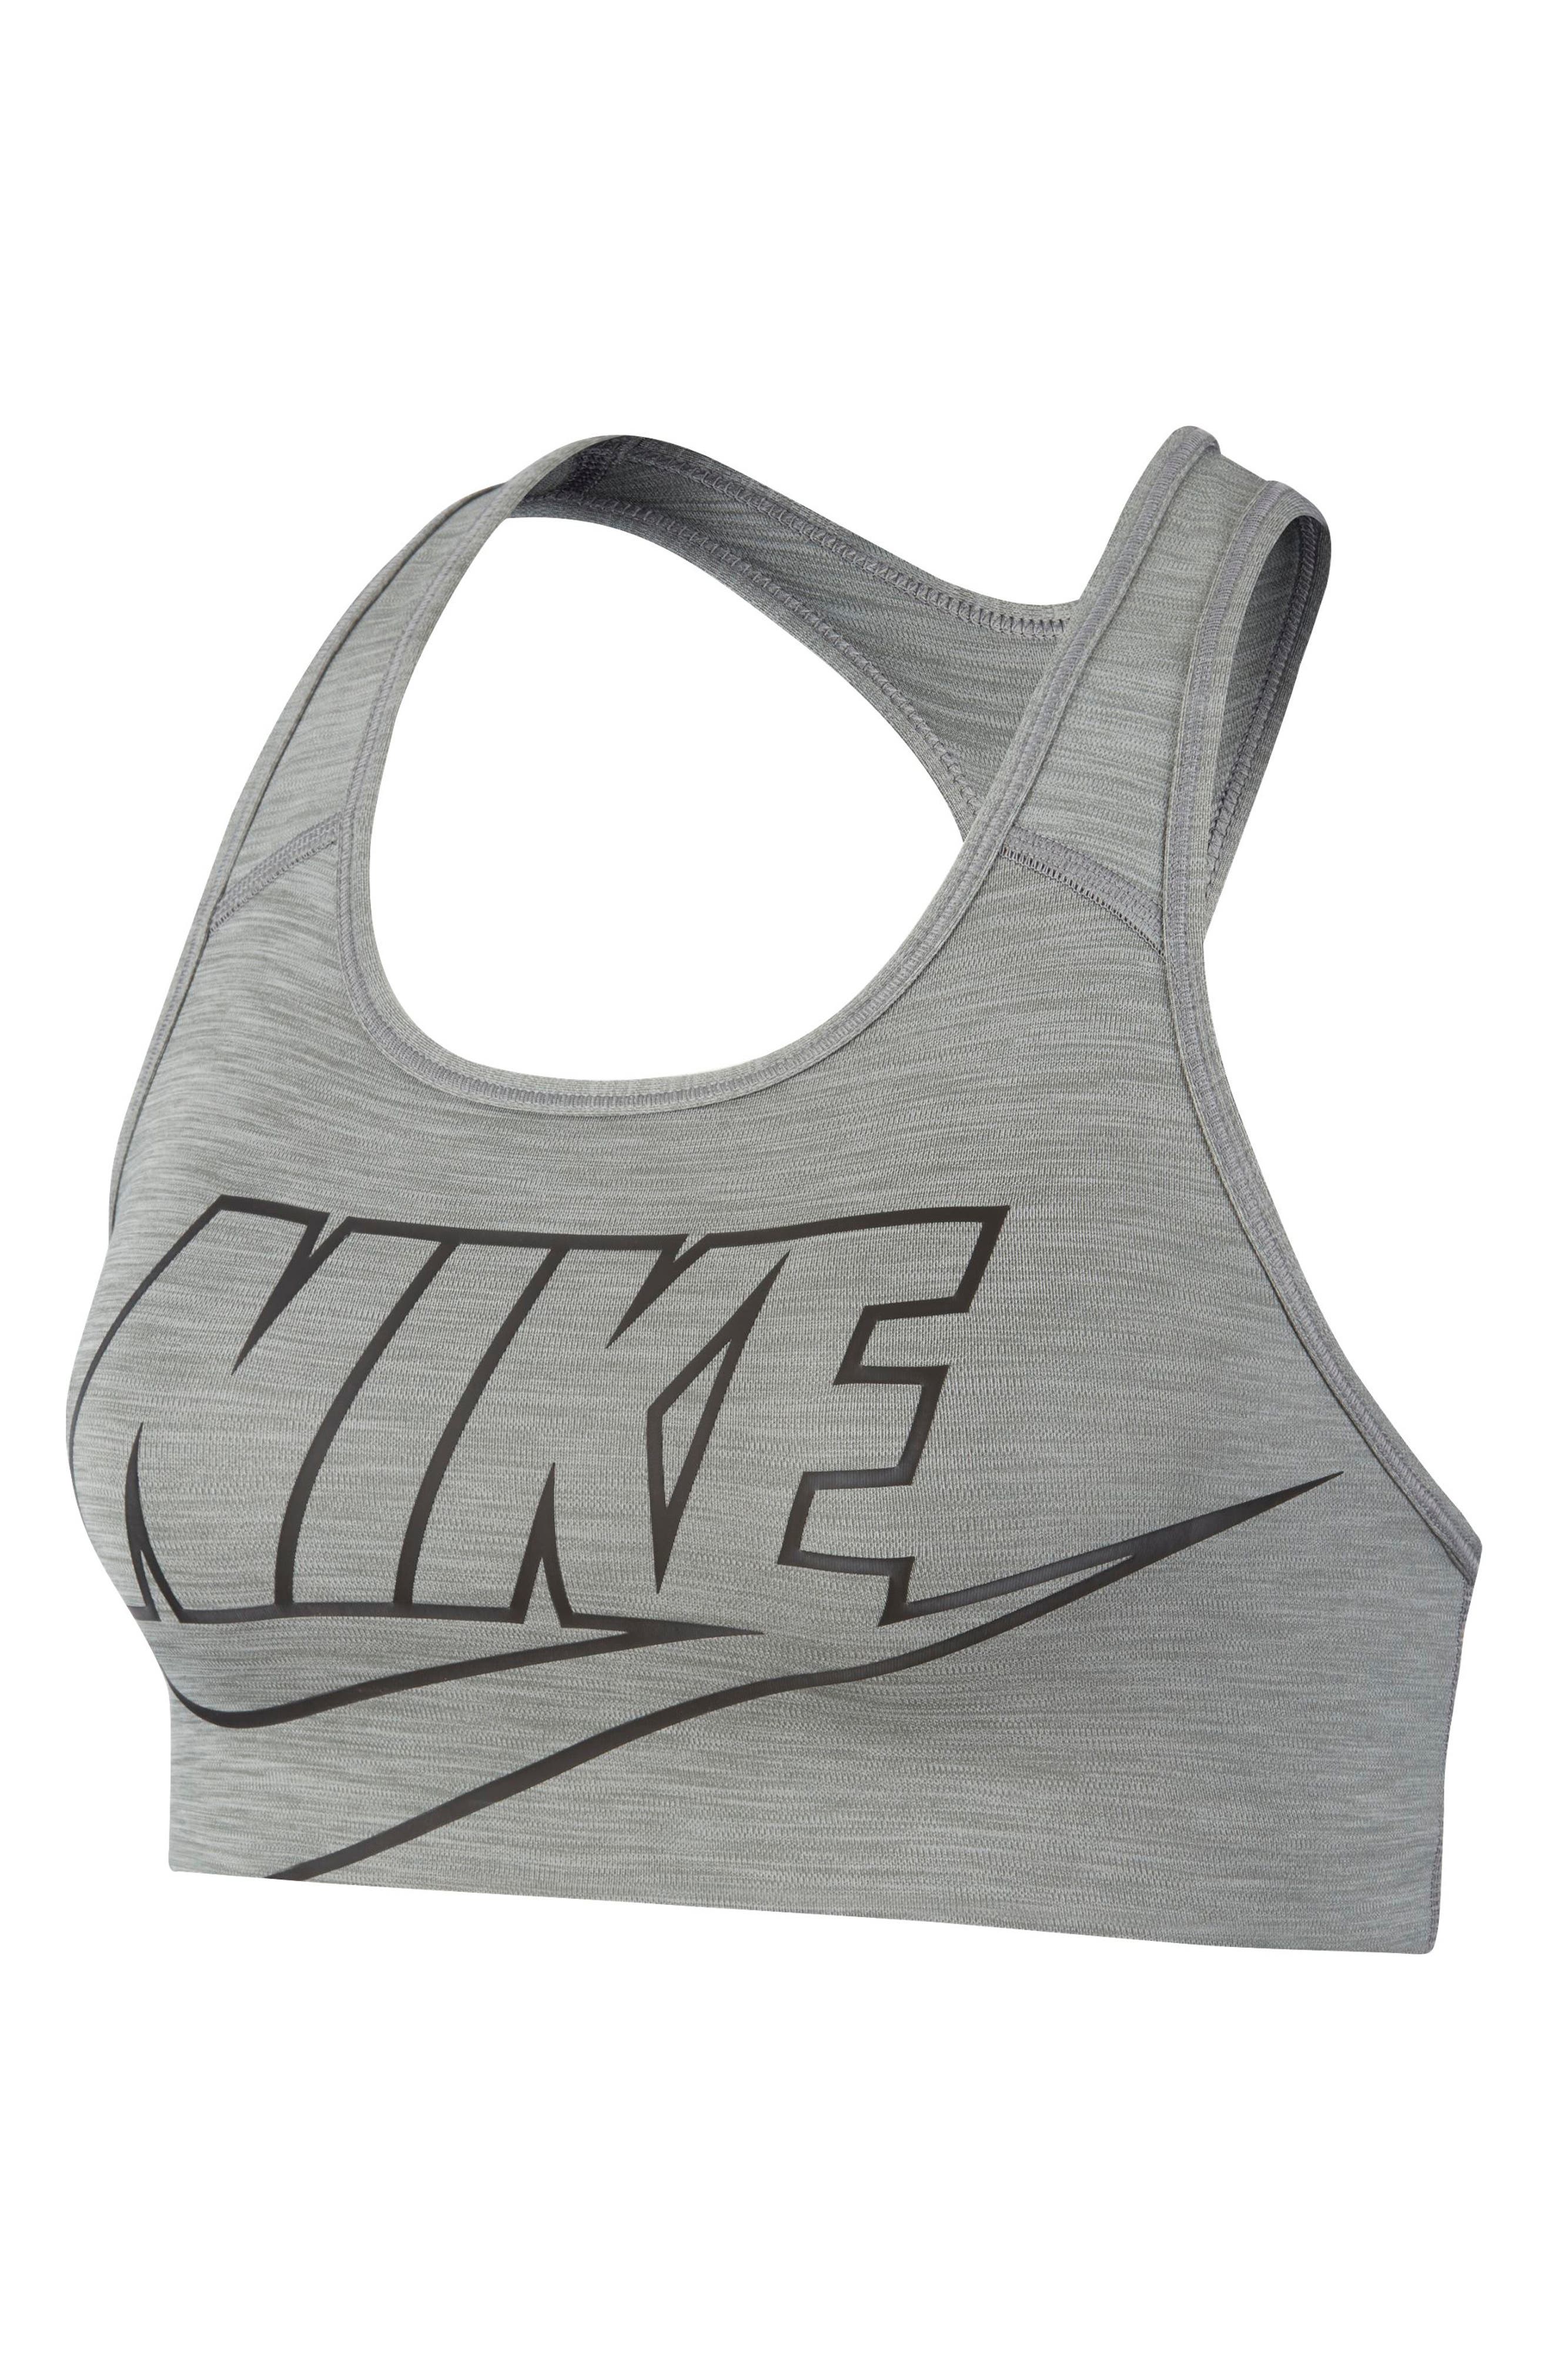 nordstrom nike womens clothing